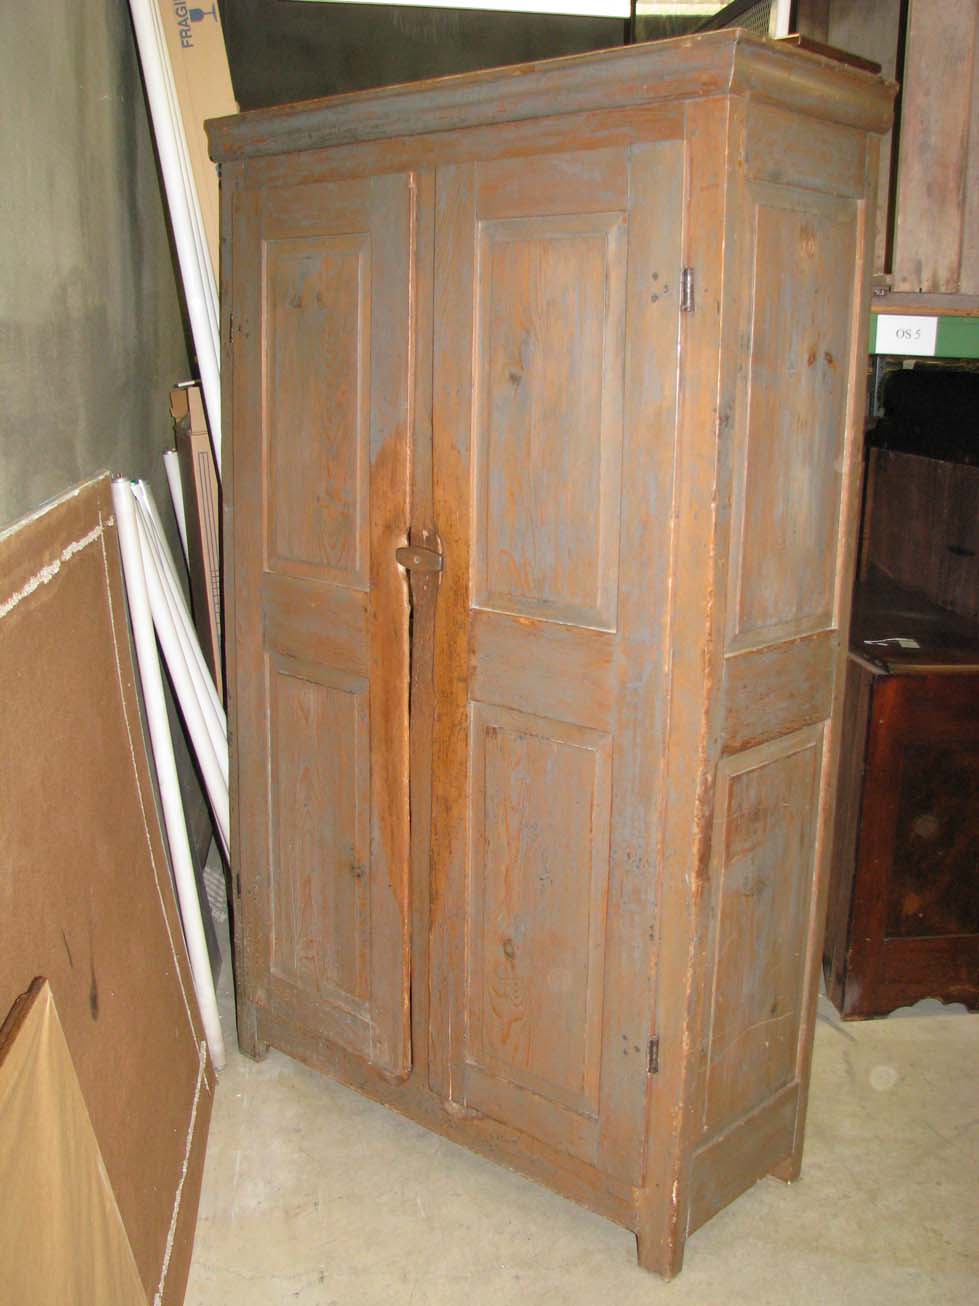 a%20kitchen%20cupboard%20with%20two%20doors%20made%20out%20of%20pine